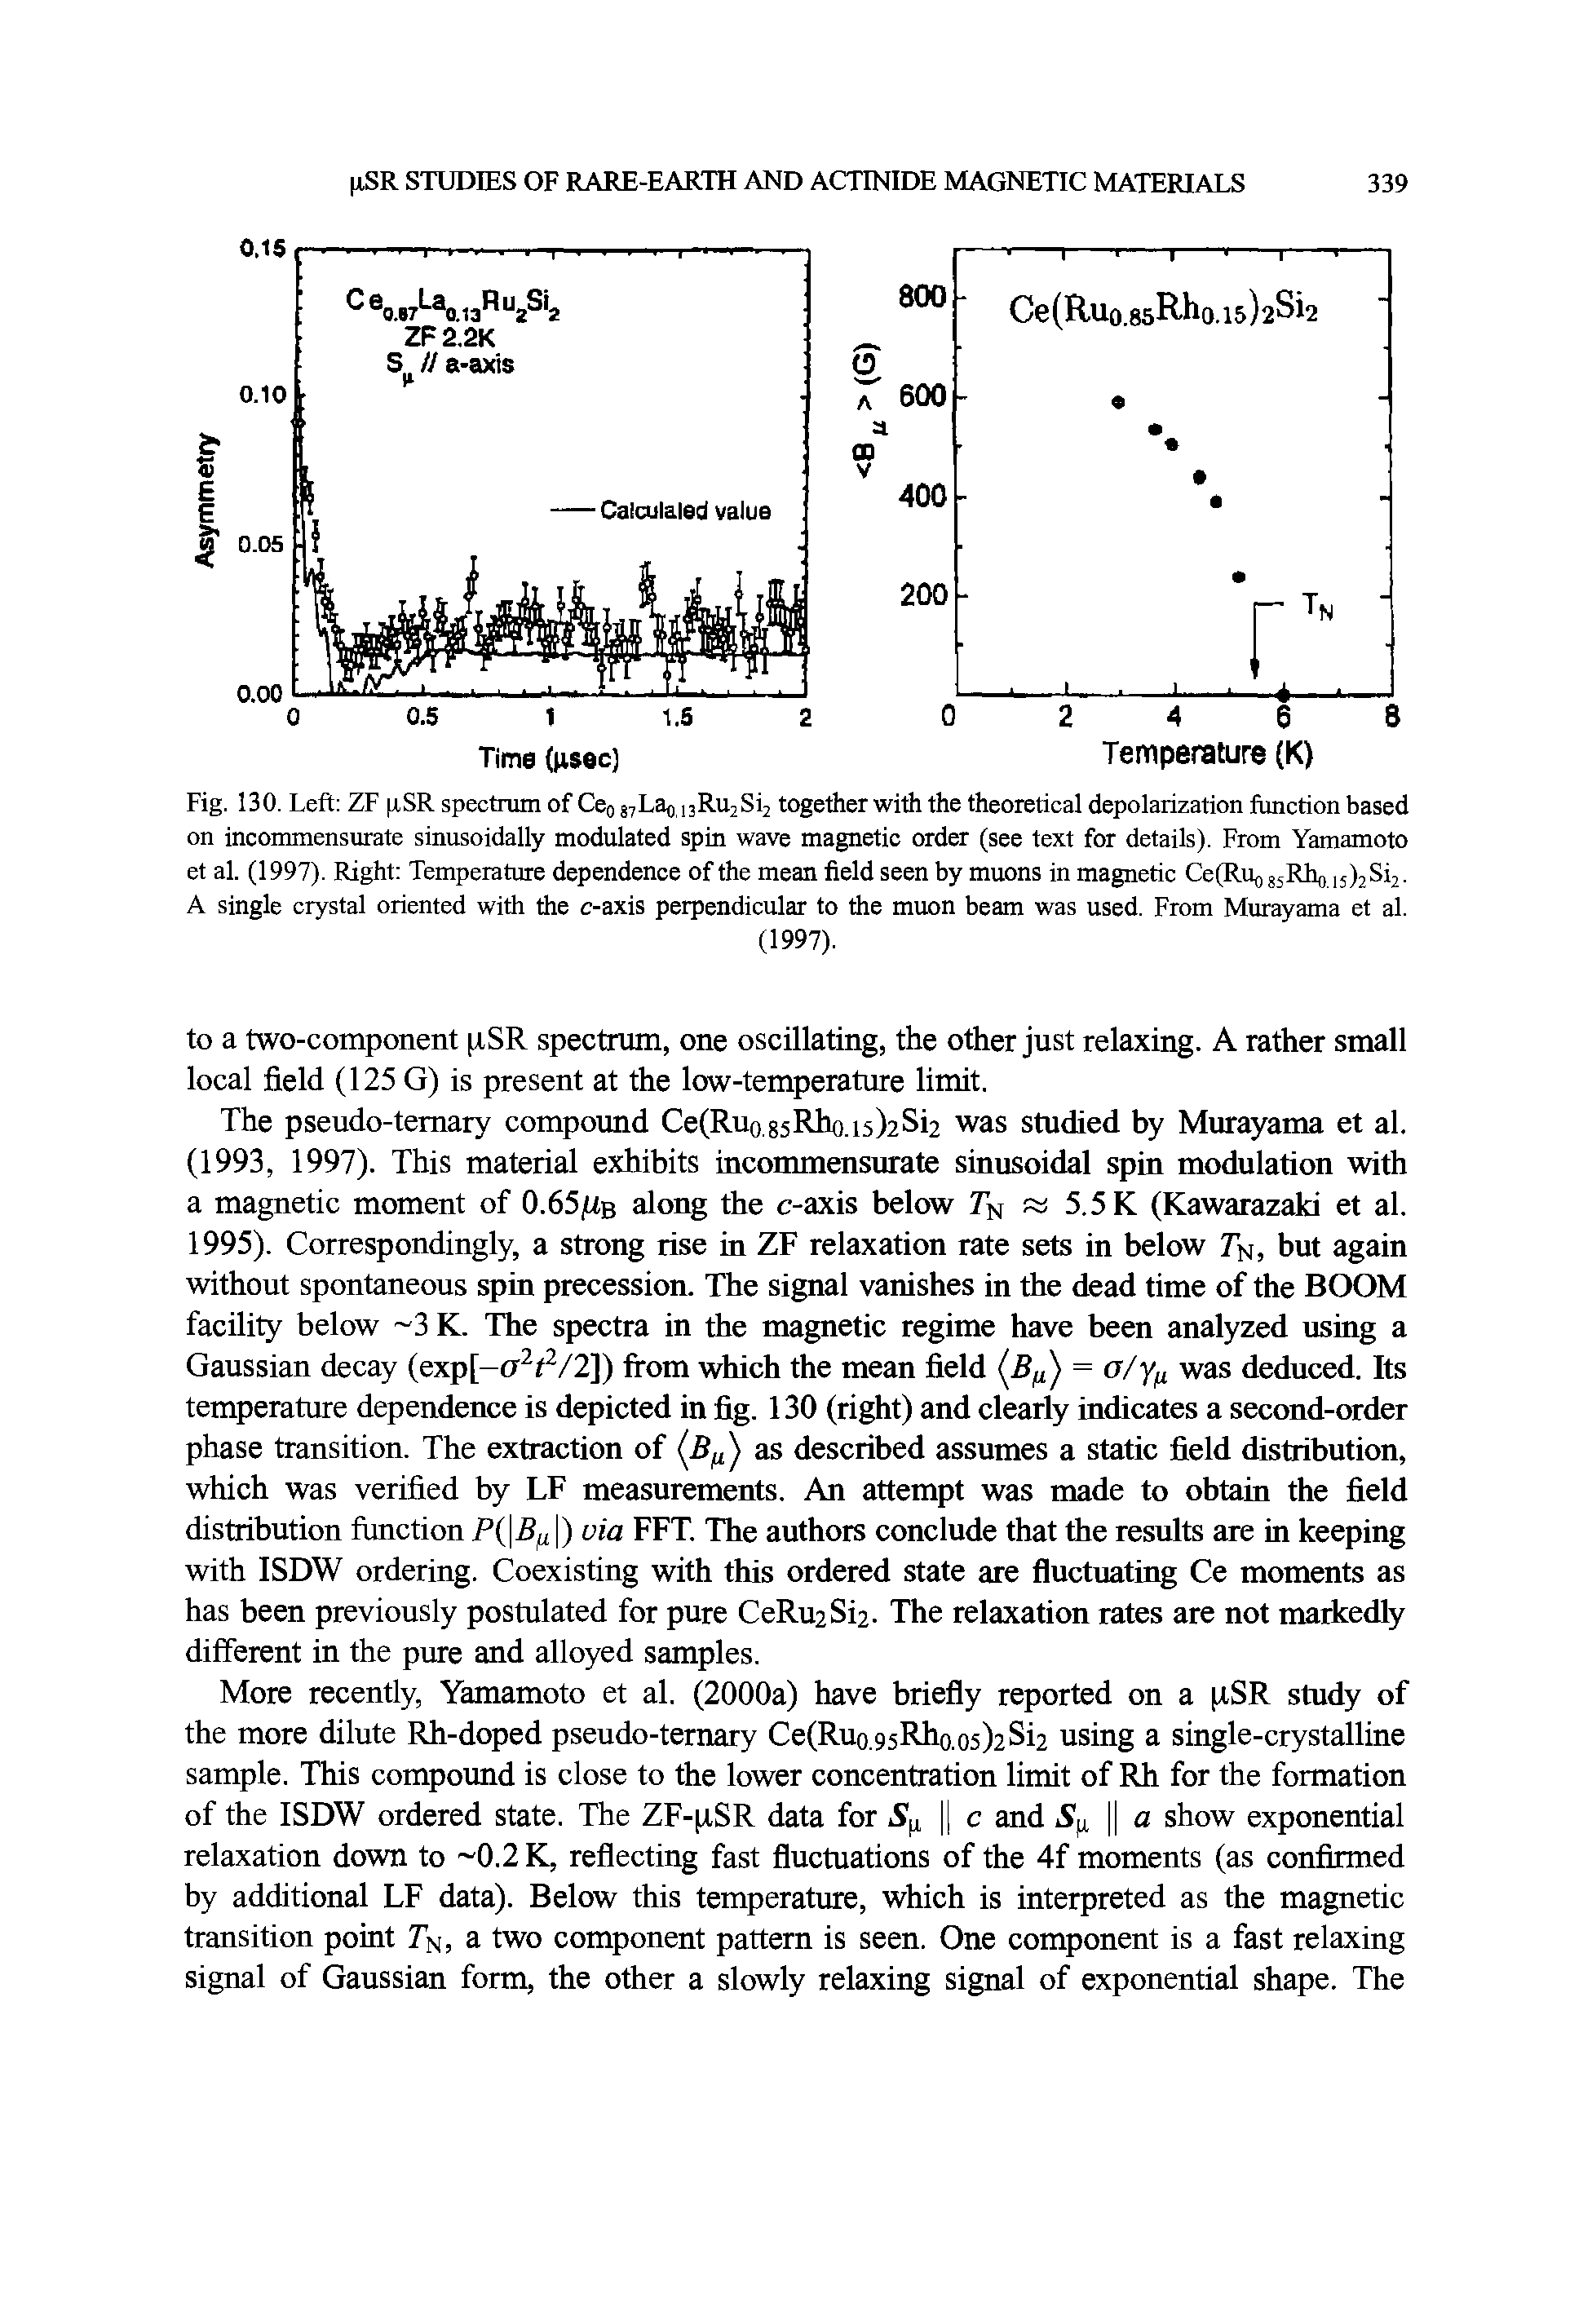 Fig. 130. Left ZF xSR spectrum of Ceo87Lao, 3Ri2Si2 together with the theoretical depolarization fimetion based on incommensurate sinusoidally modulated spin wave magnetic order (see text for details). From Yamamoto et al. (1997). Right Temperature dependence of the mean field seen by muons in magnetic Ce(R% jsRho ] 5)2 12 A single crystal oriented with the c-axis perpendicular to the muon beam was used. From Murayama et al.